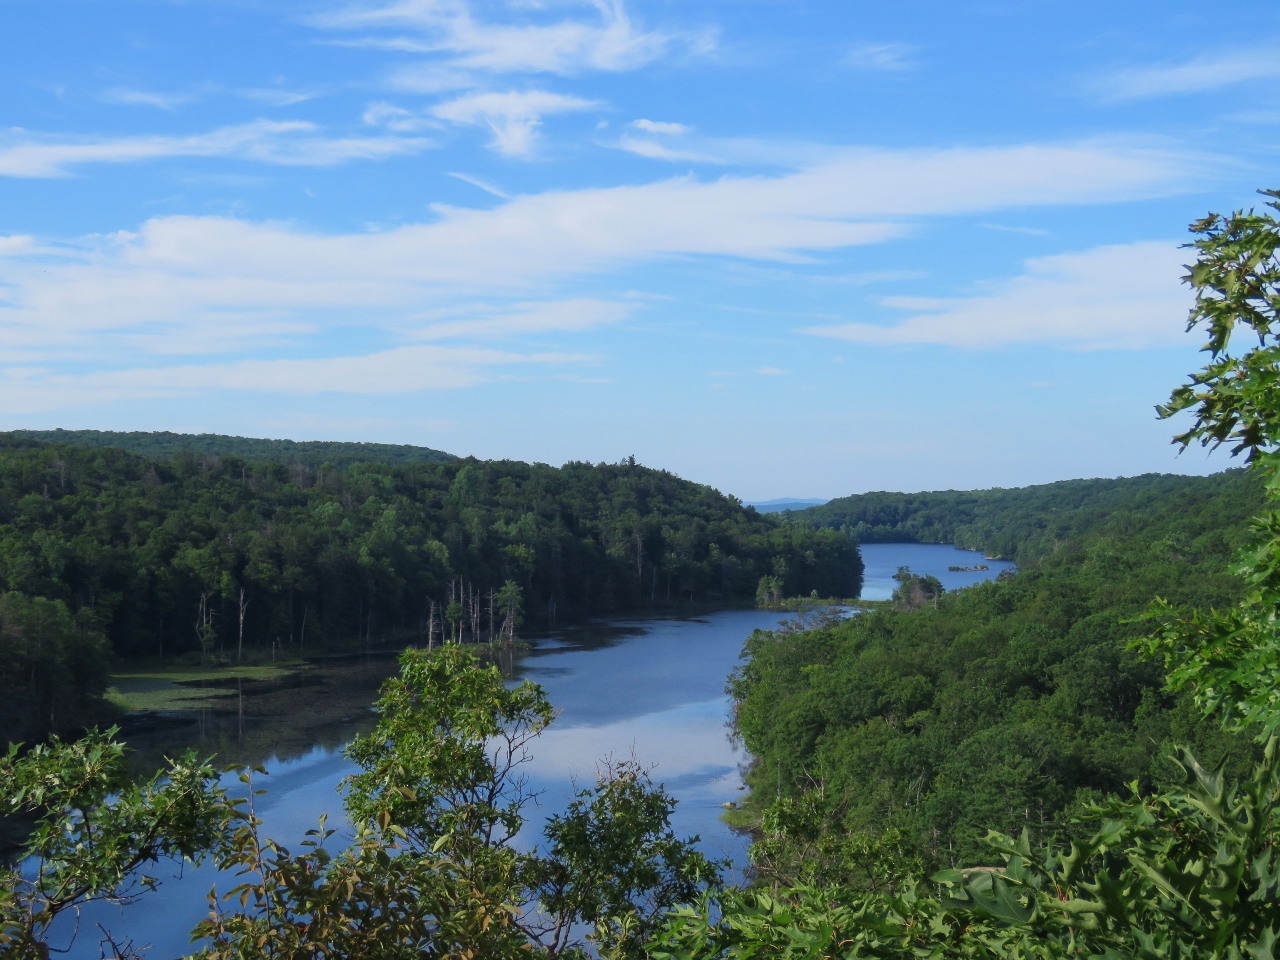 View of Canopus Lake from the Appalachian Trail in Fahnestock State Park. Photo Credit: Daniela Wagstaff